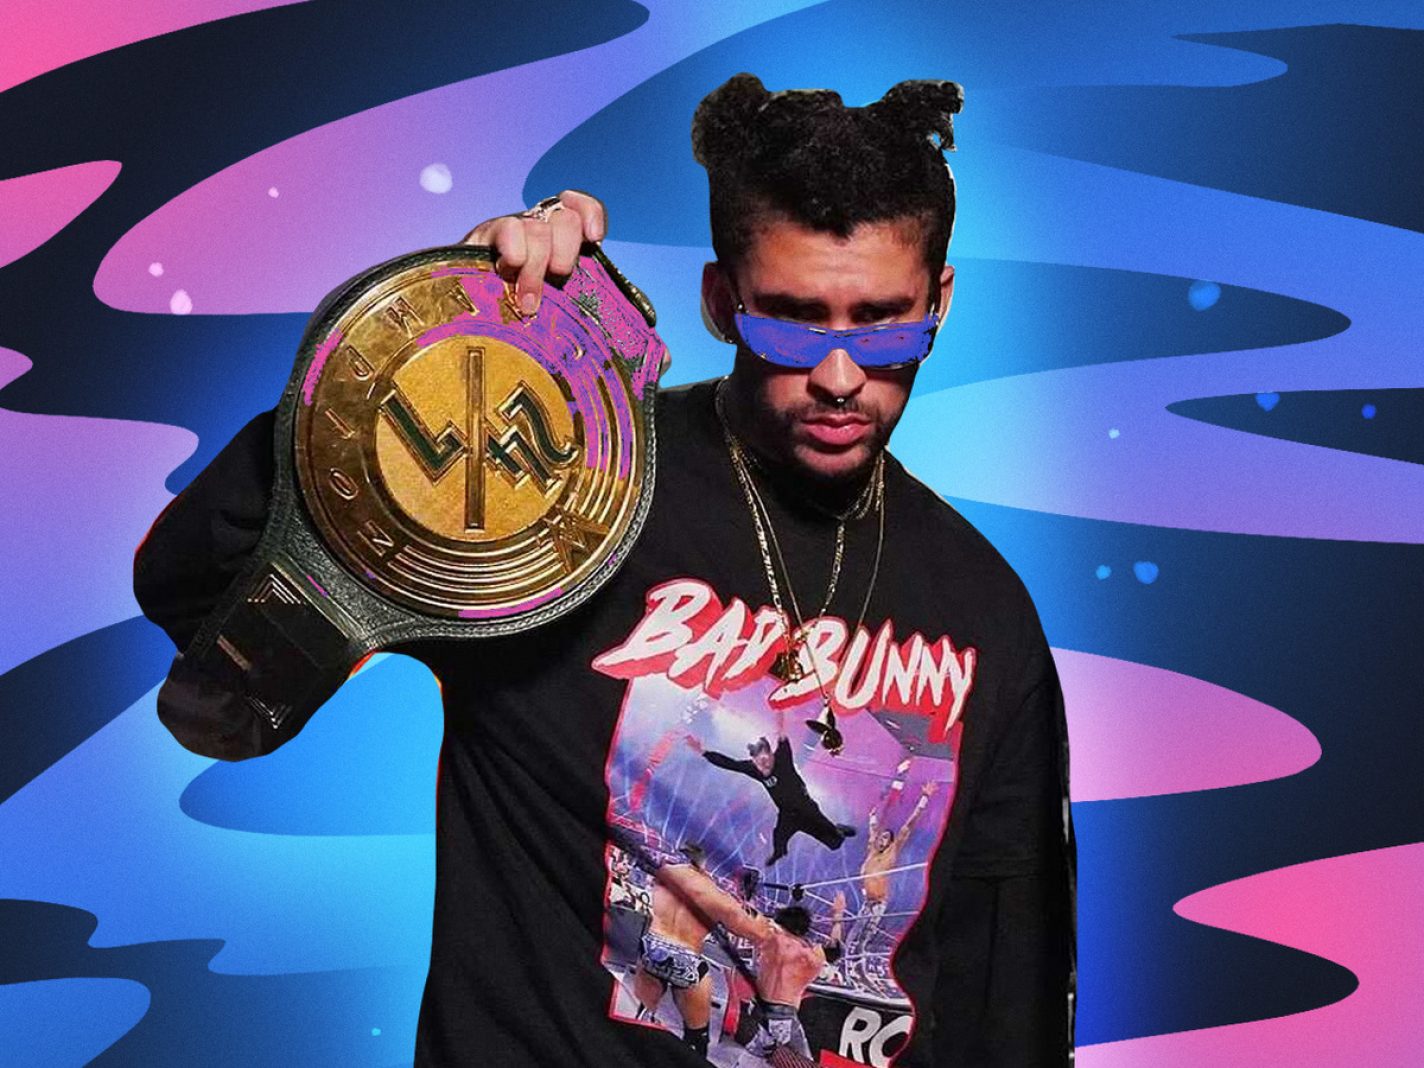 Puerto Rican Rapper Bad Bunny Wins 24/7 Championship Belt During 'WWE Raw'